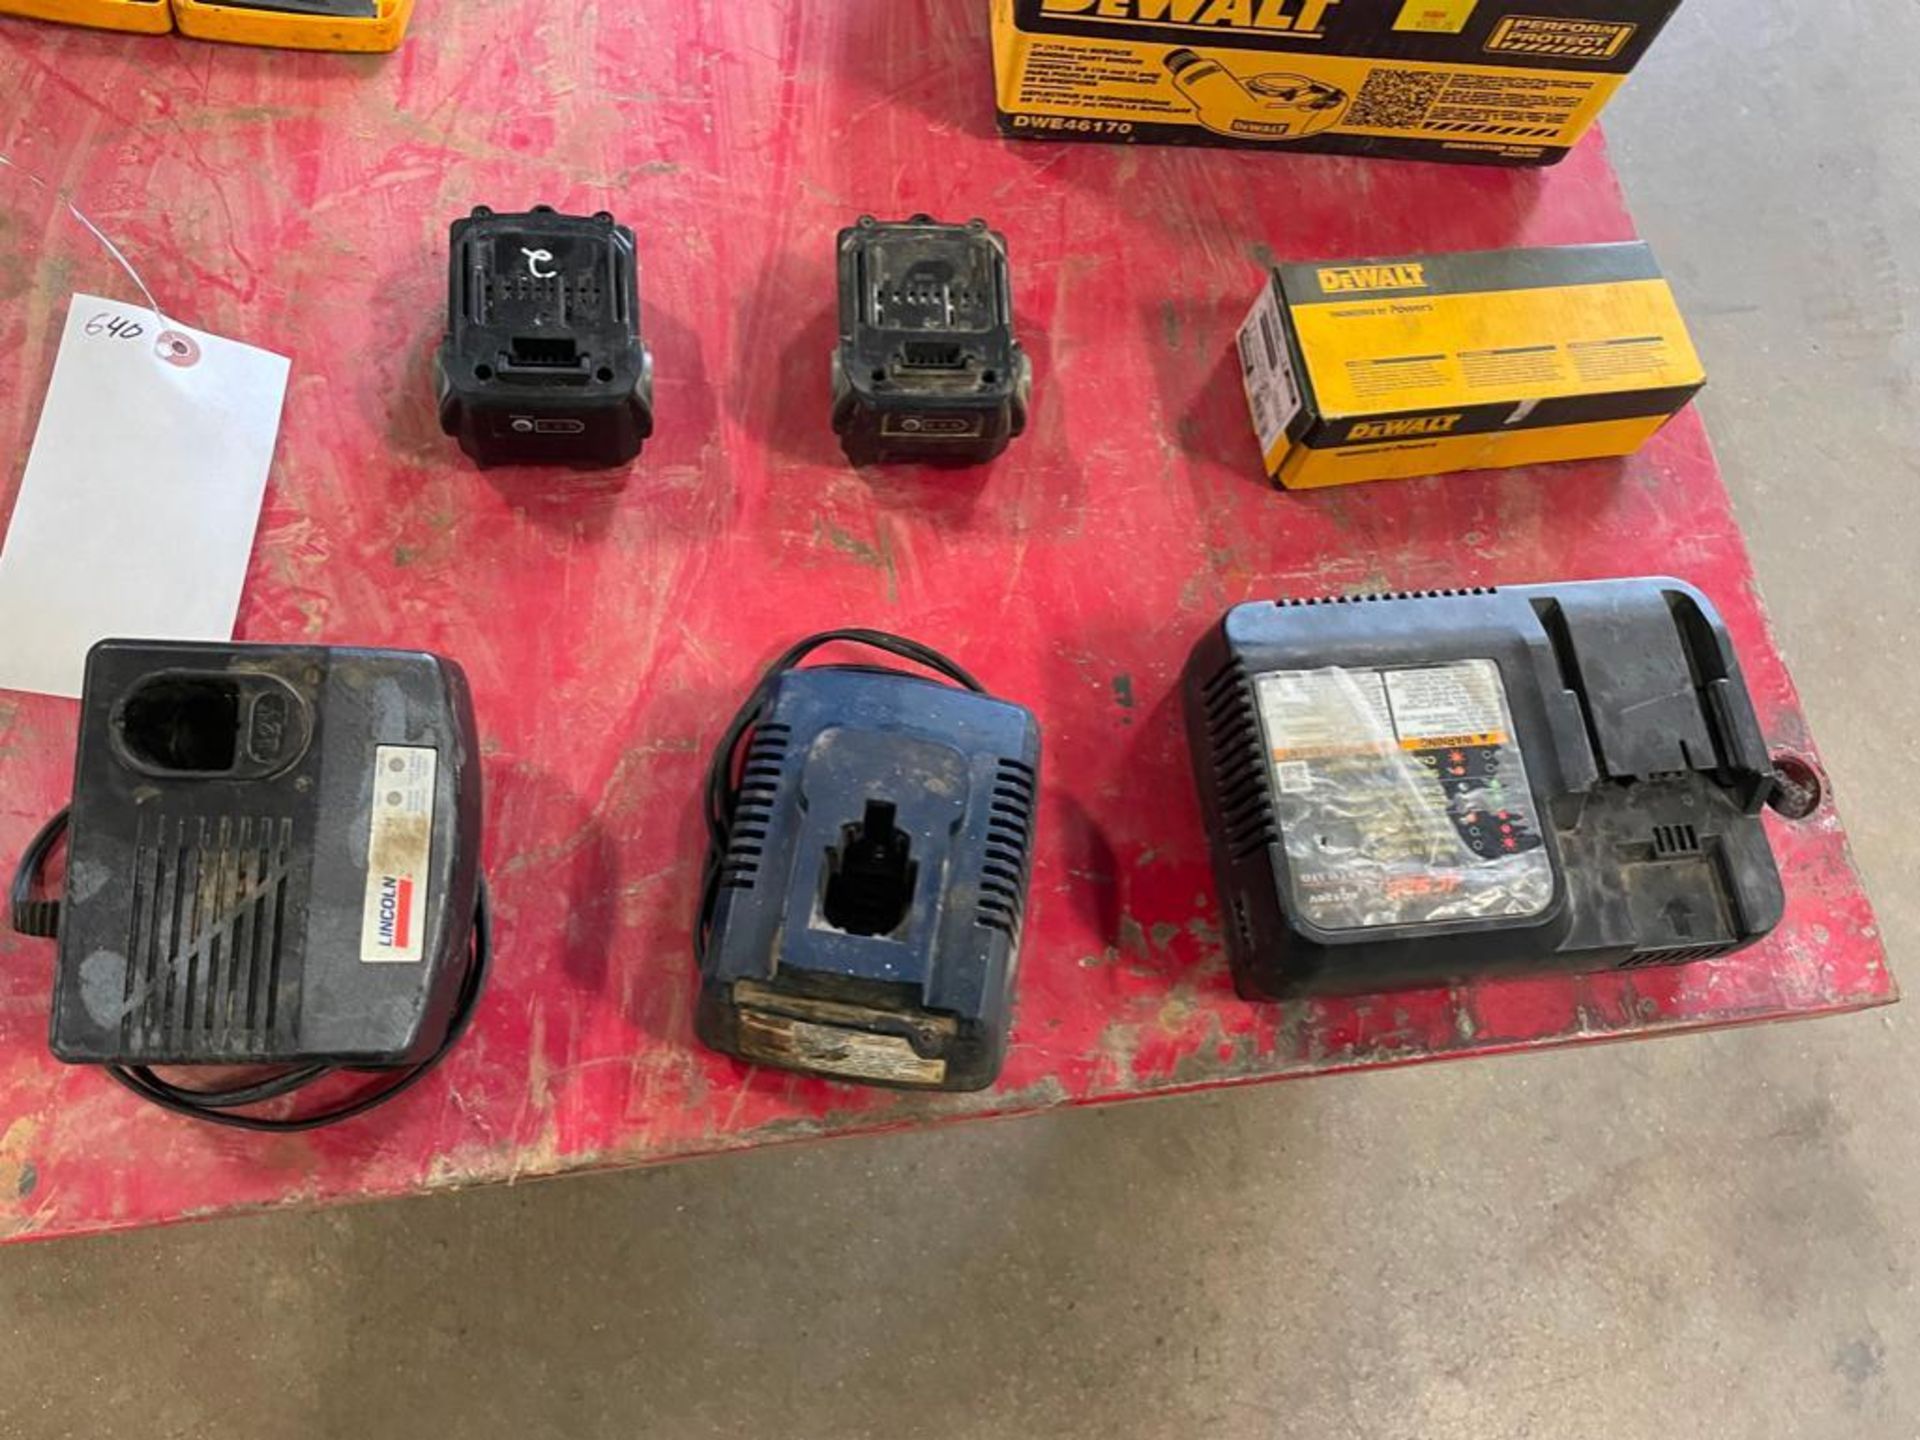 Miscellaneous DeWalt parts, chargers, bits, etc. Located in Hazelwood, MO - Image 5 of 14